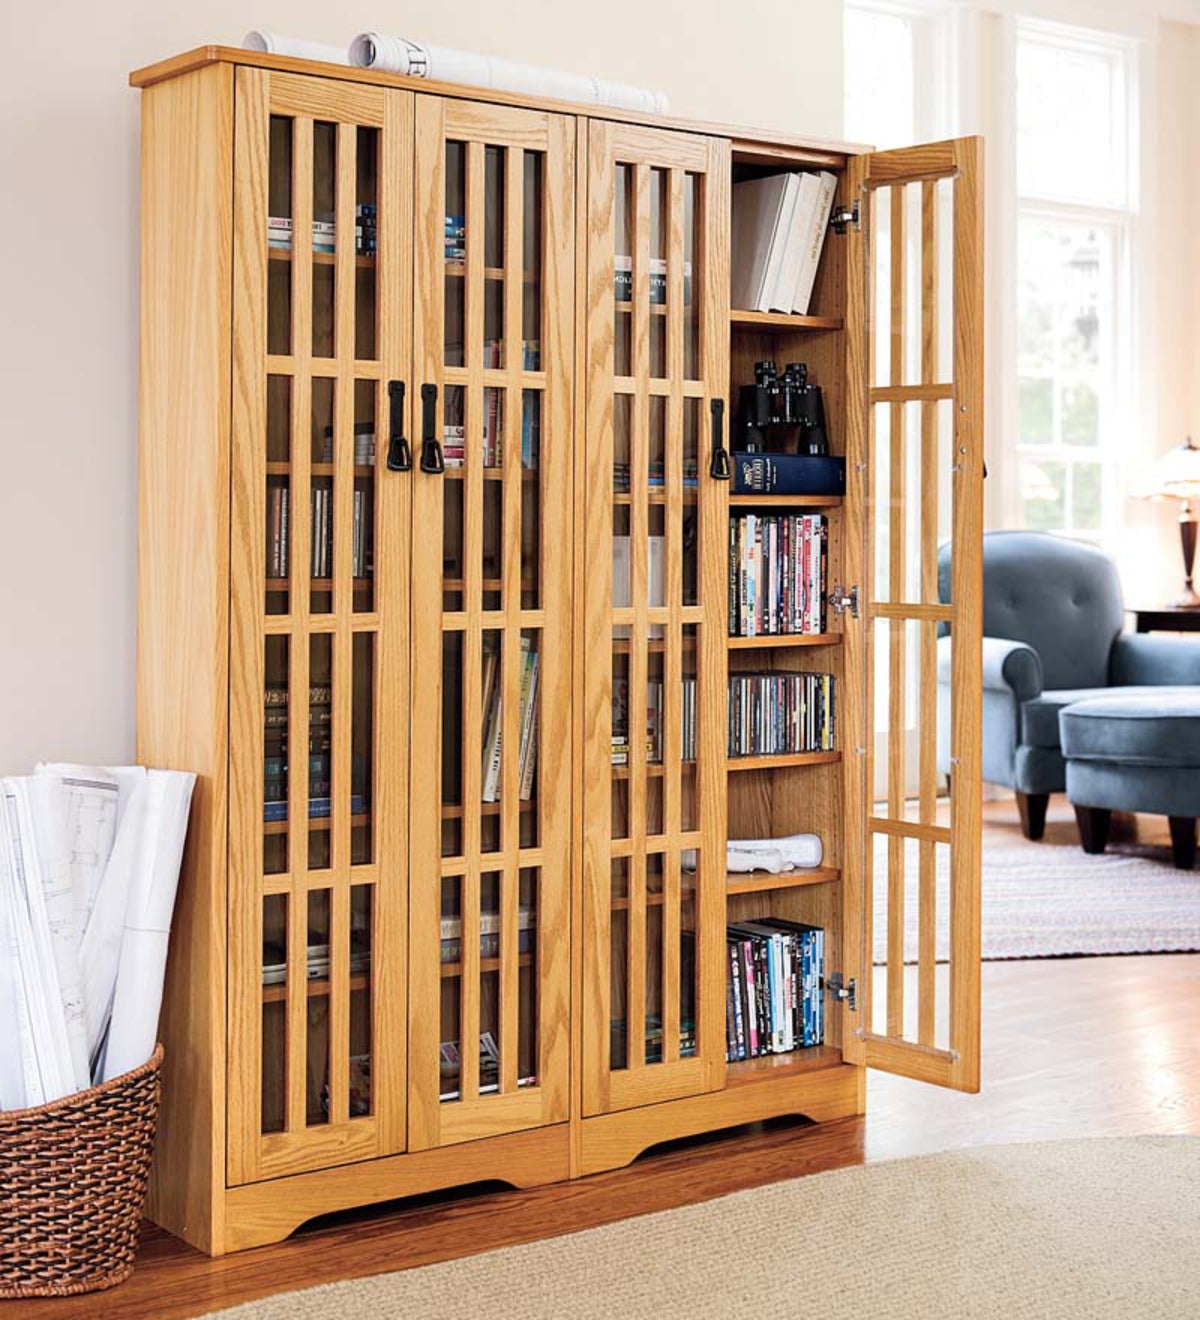 Large Arts and Crafts Style Glass-Front Media Storage Cabinet with Adjustable Shelves